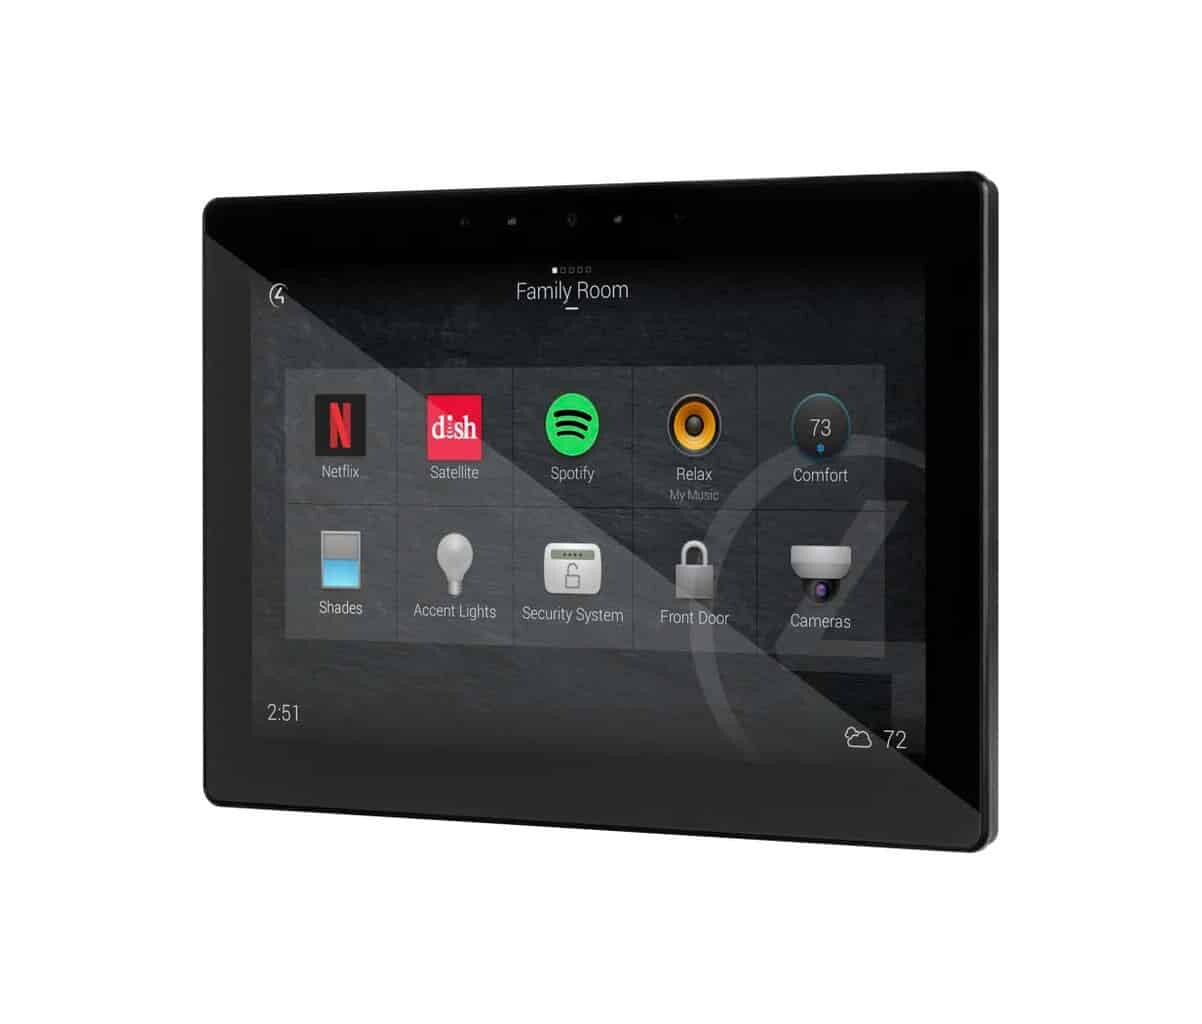 Control4 T4 In-Wall Touch Screen (8527724413276)